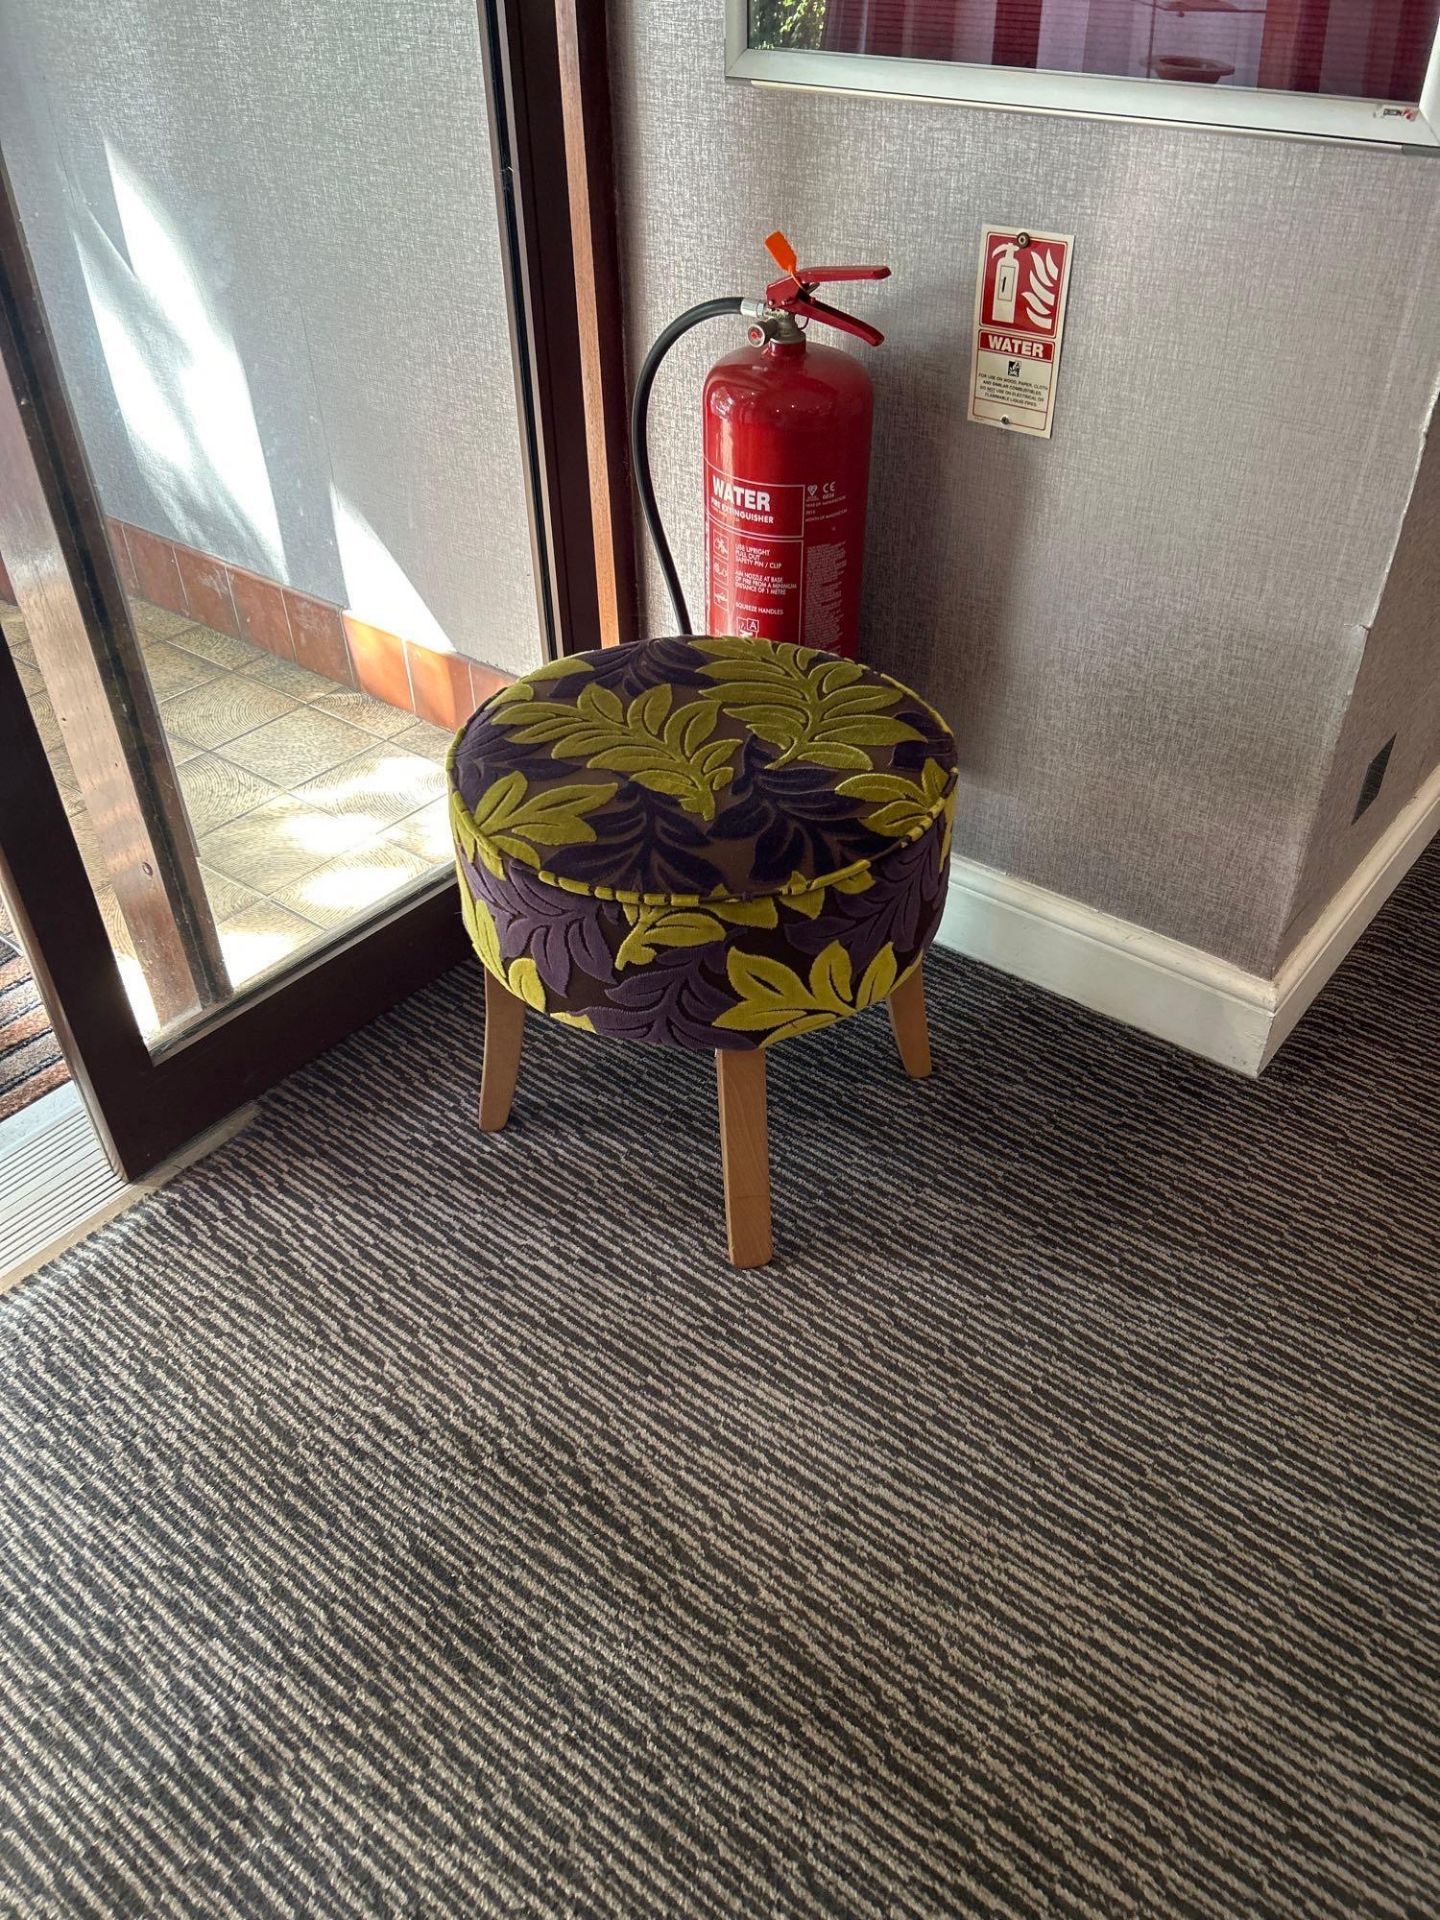 Pair Of Fabric Covered Stool/Pouffes With A Plumb And Gold Leaf Patterned Fabric. - Bild 2 aus 2